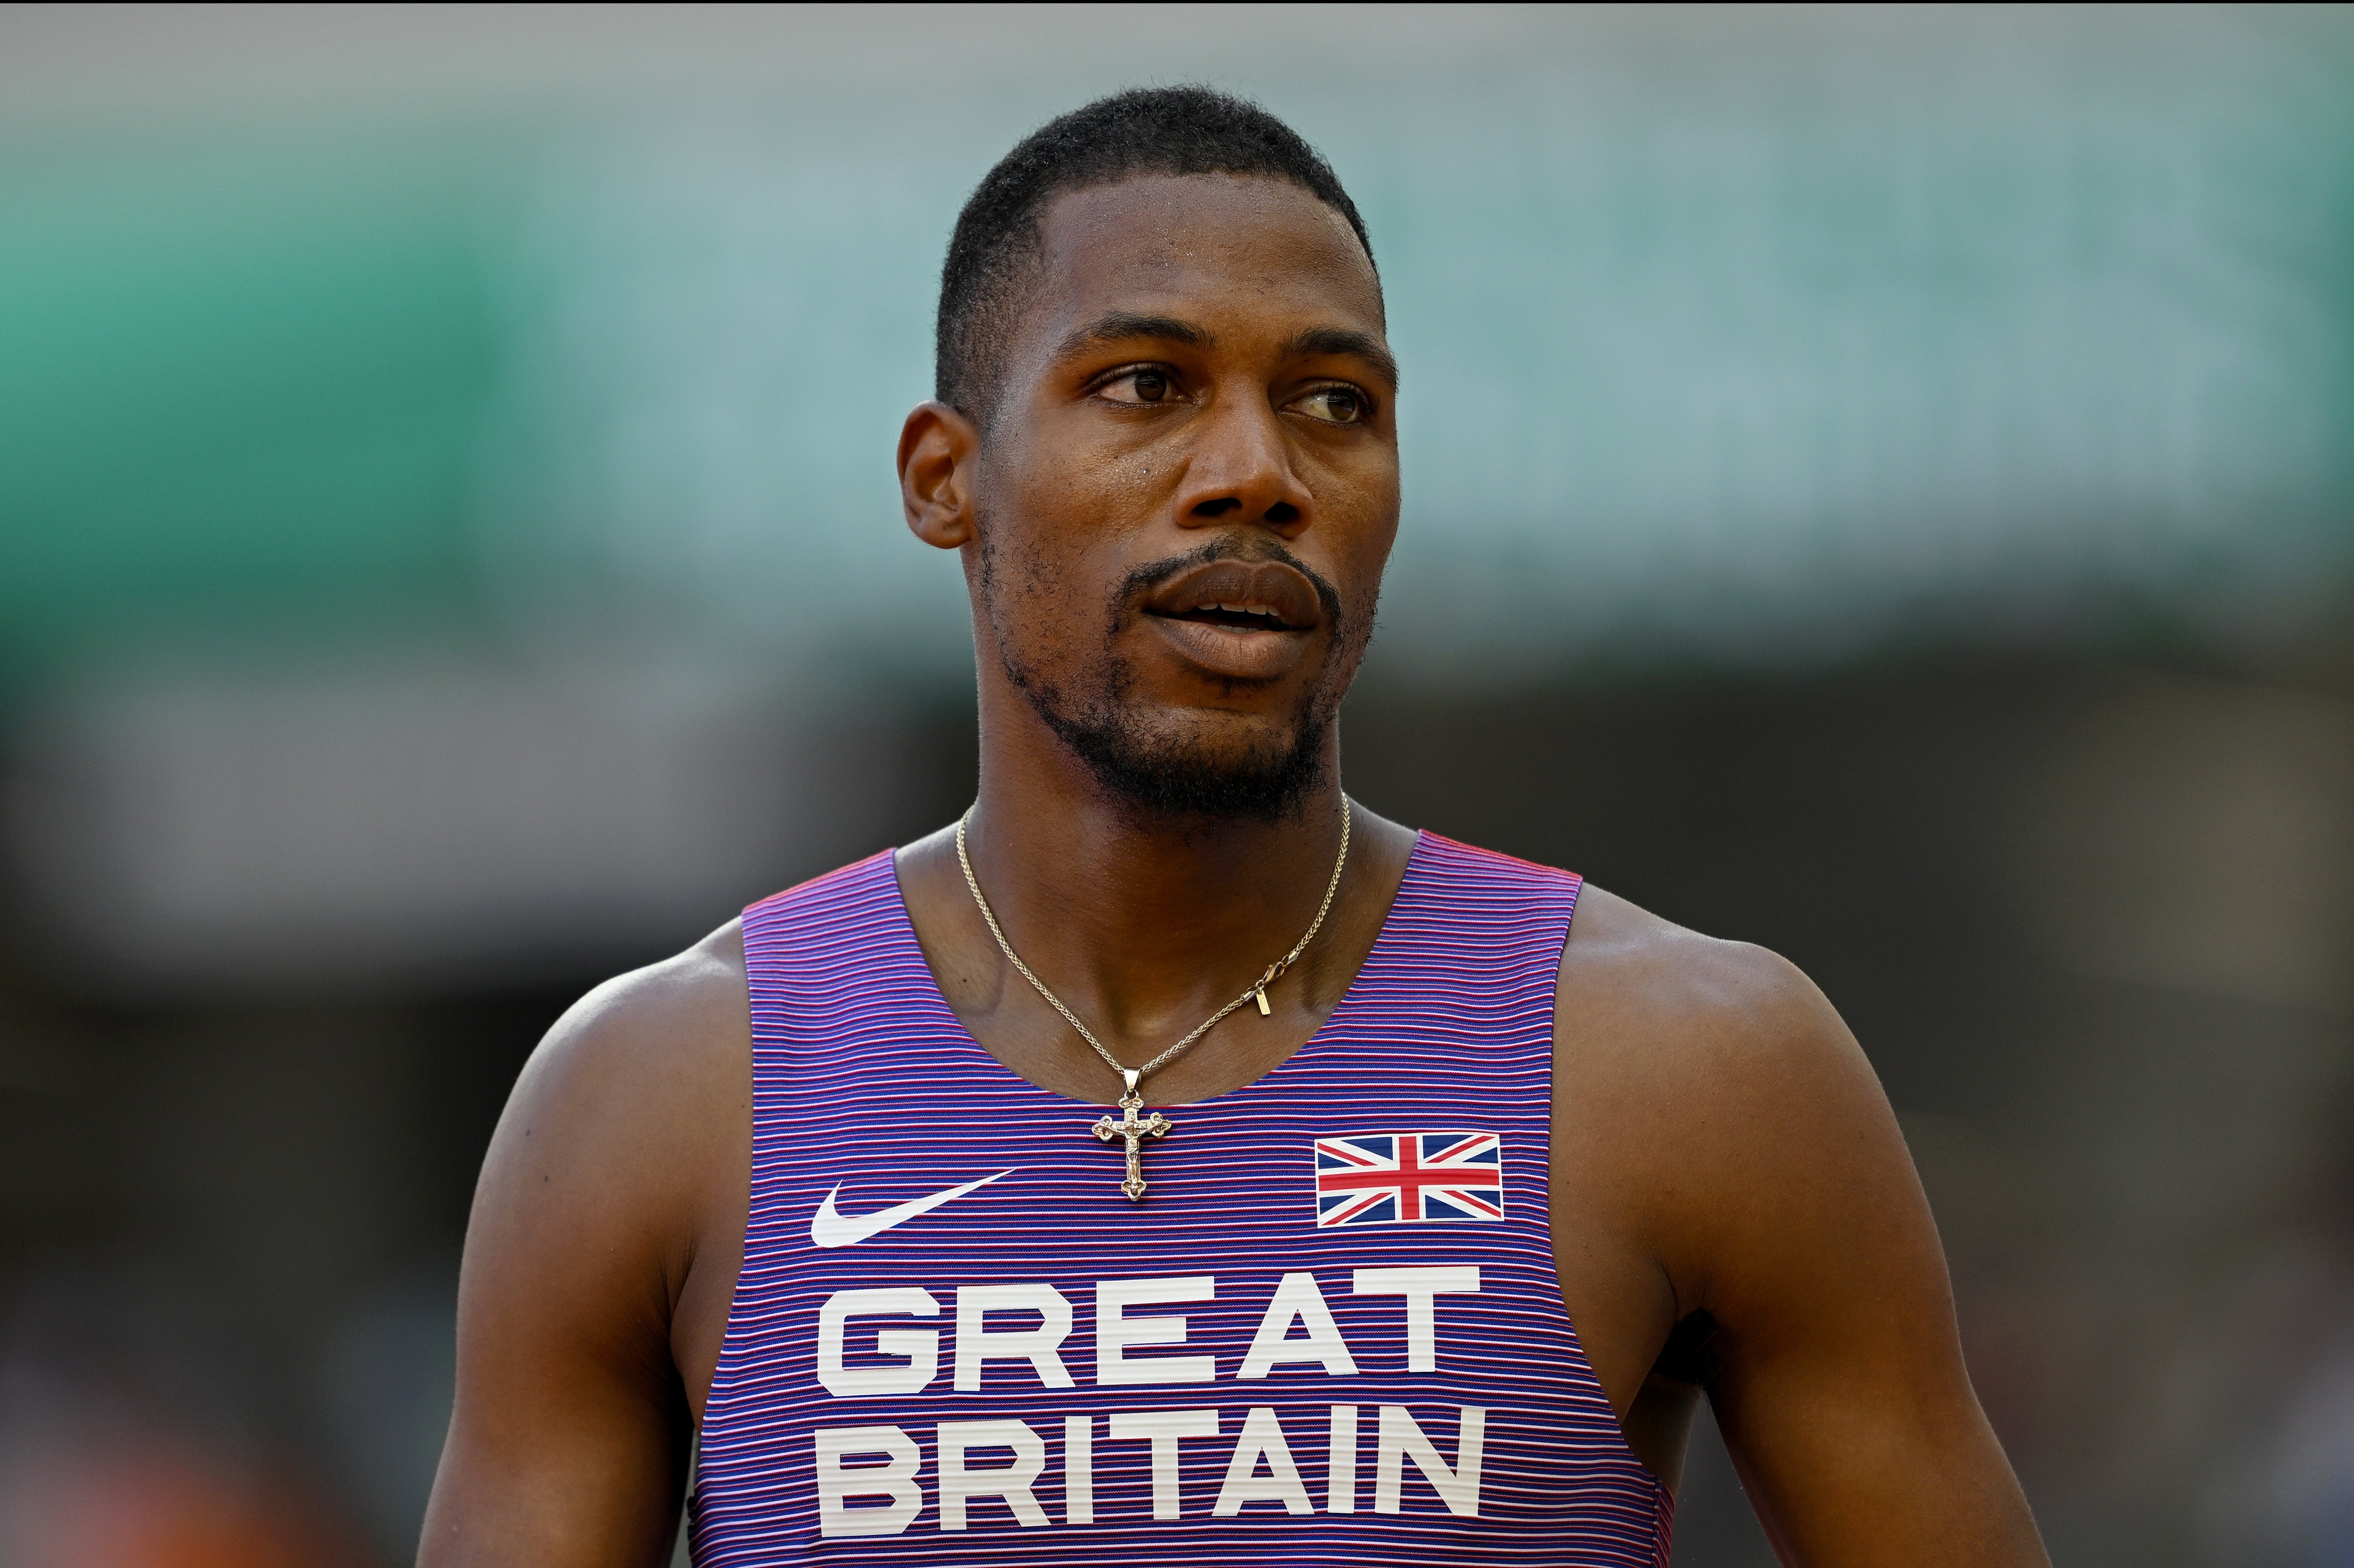 Zharnel Hughes will miss the European Championships in Rome